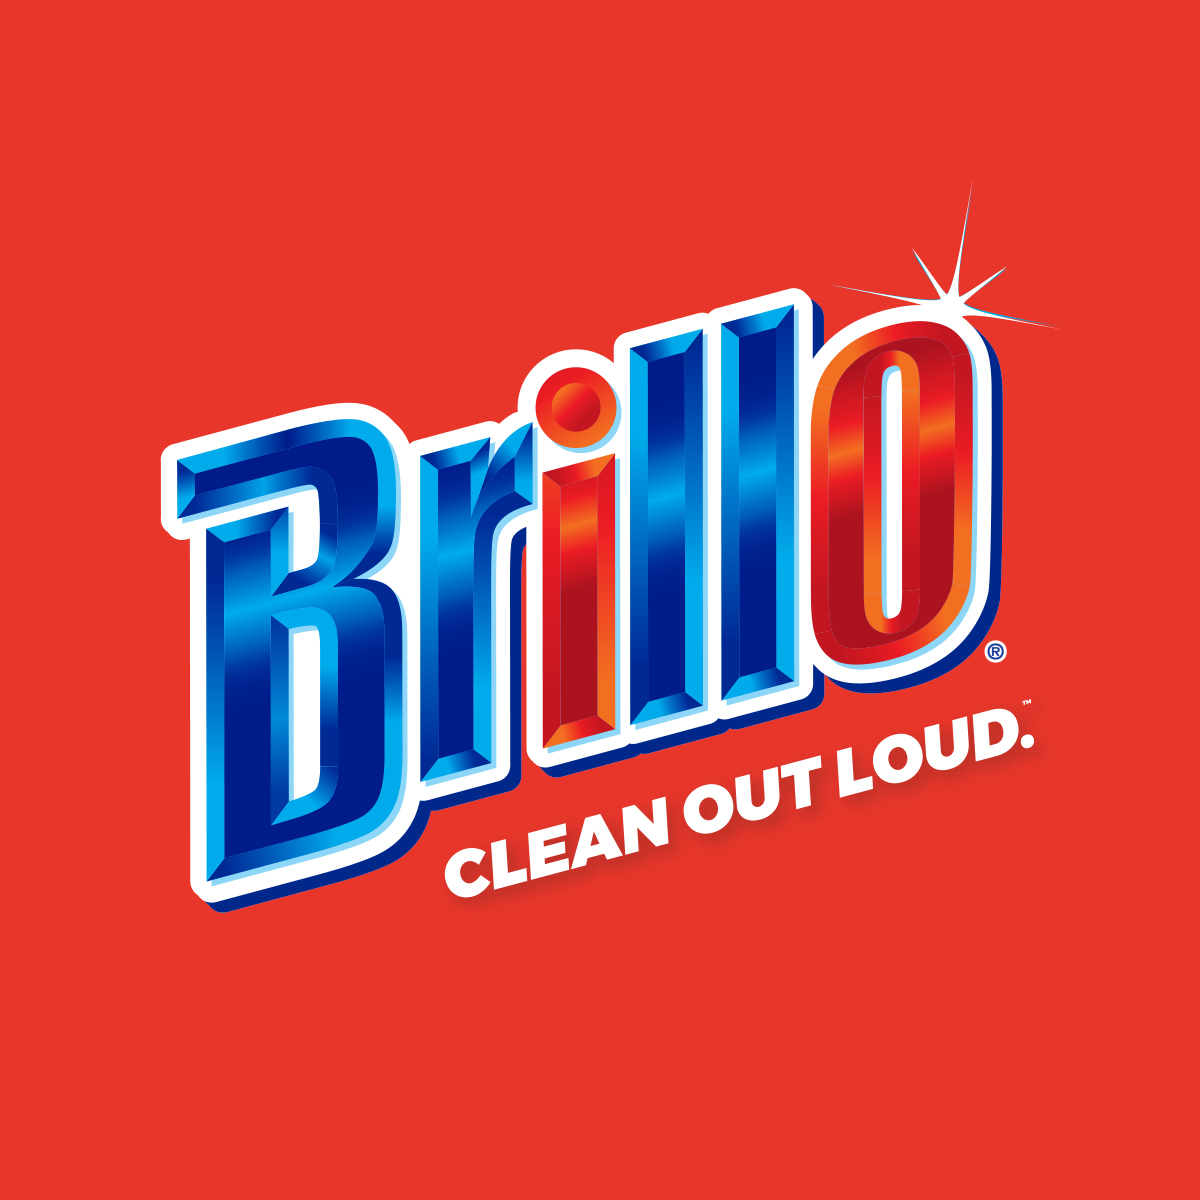  Brillo Heavy Duty Premium Scour Pads for Pots and Pans, Tough  on Grease, 3 Count (Heavy Duty, 3 Count (Pack of 2)) : Health & Household